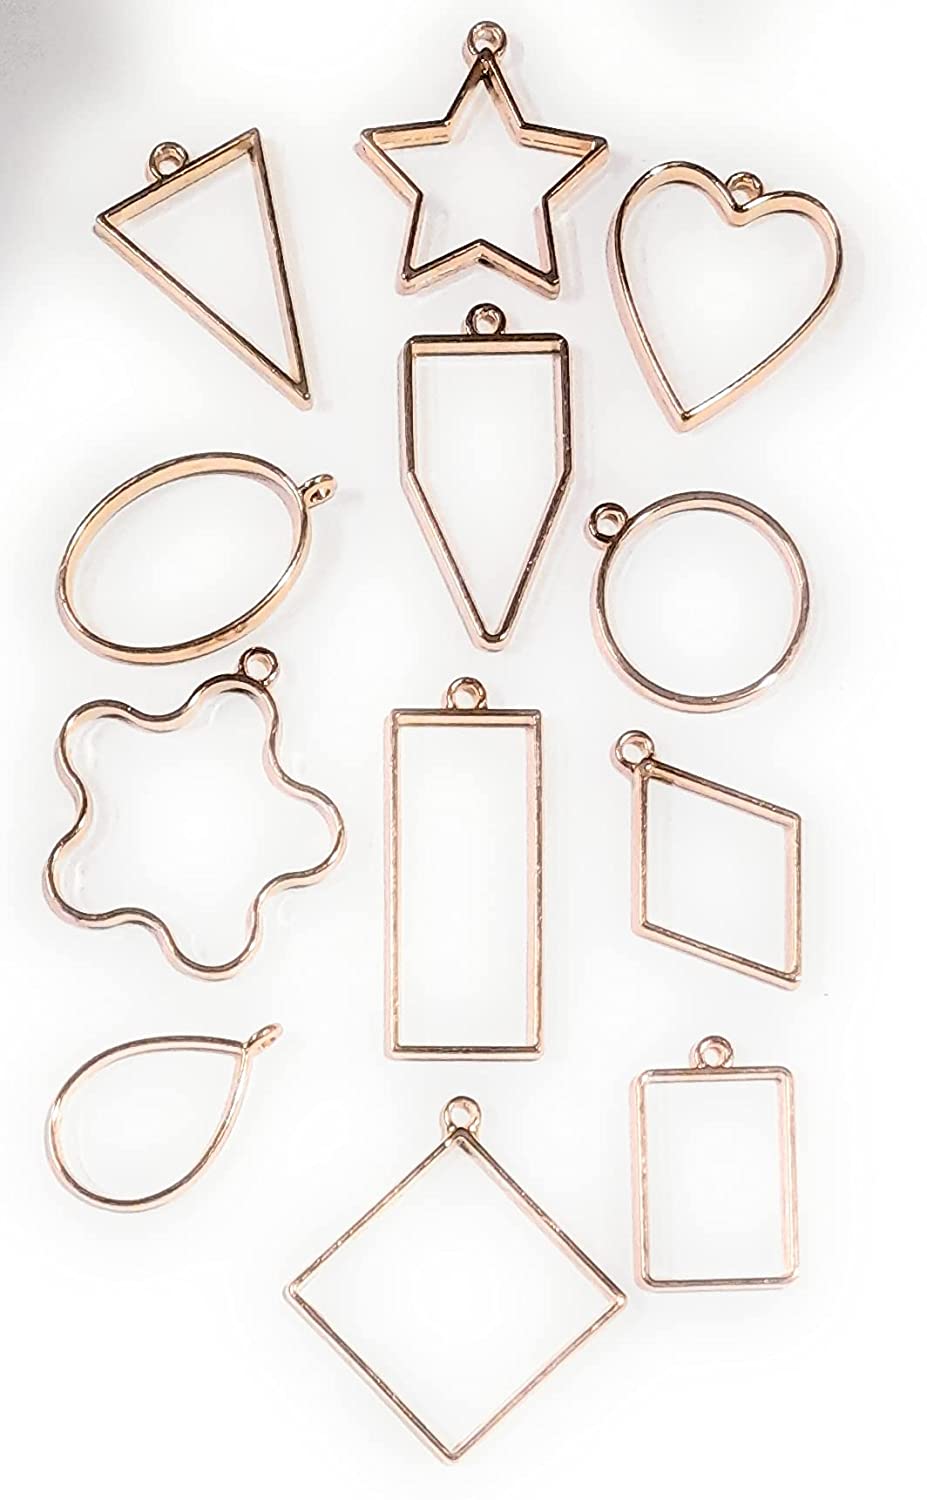 Gold Metal Jewelry Mould for Resin Set of 12 Piece